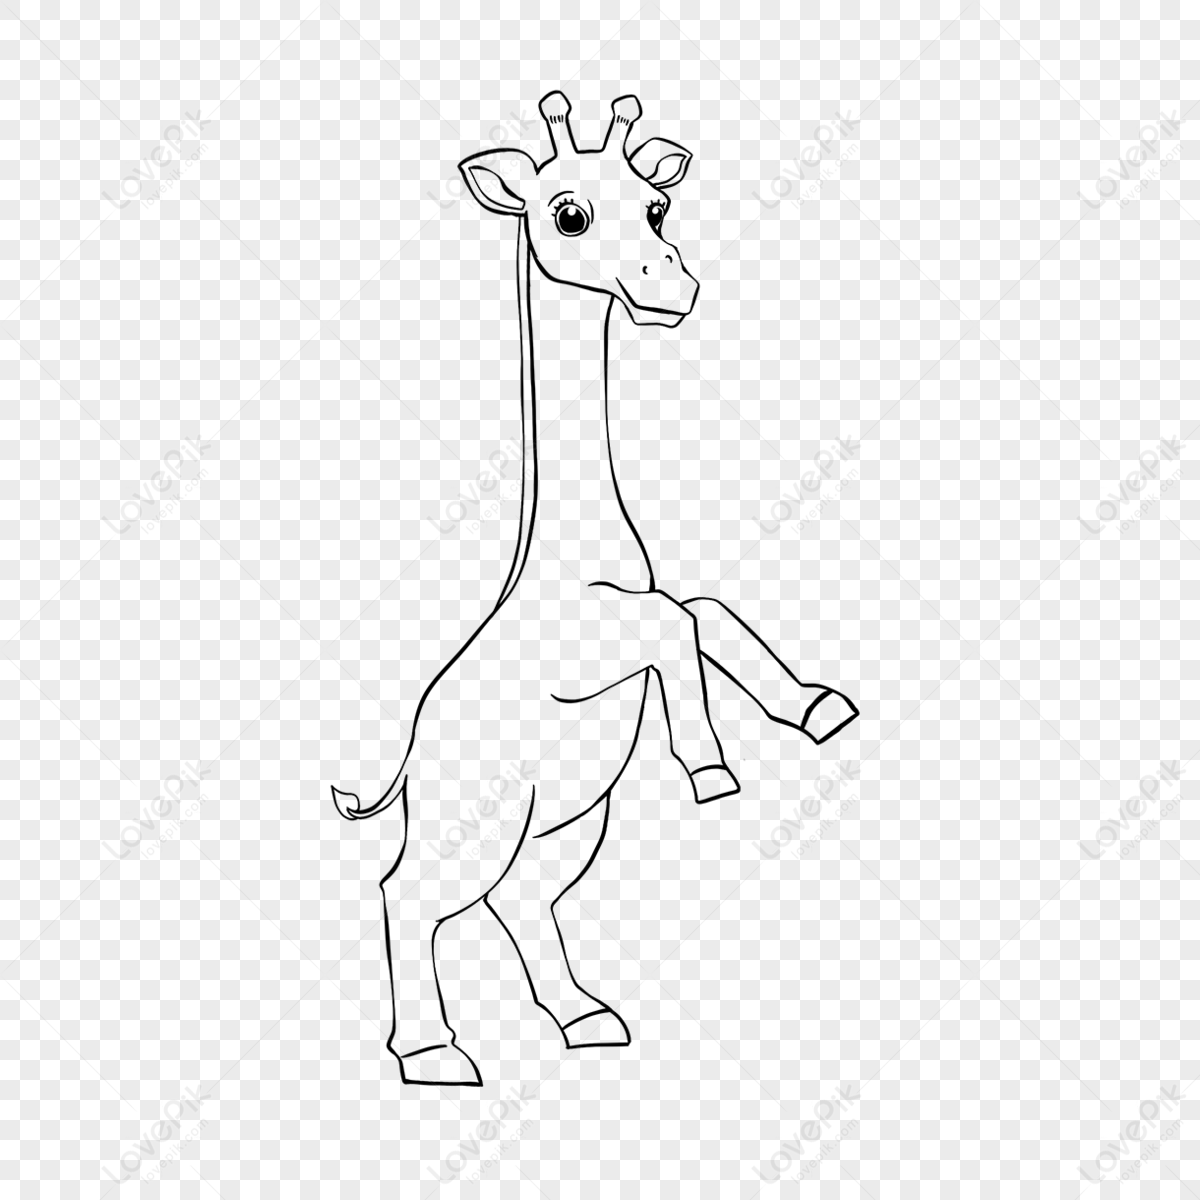 Giraffe Clipart Black And White Lineart Giraffe Kneeling Sitting Cute Hand  Drawn, Giraffe Drawing, Lip Drawing, Ear Drawing PNG Transparent Clipart  Image and PSD File for Free Download